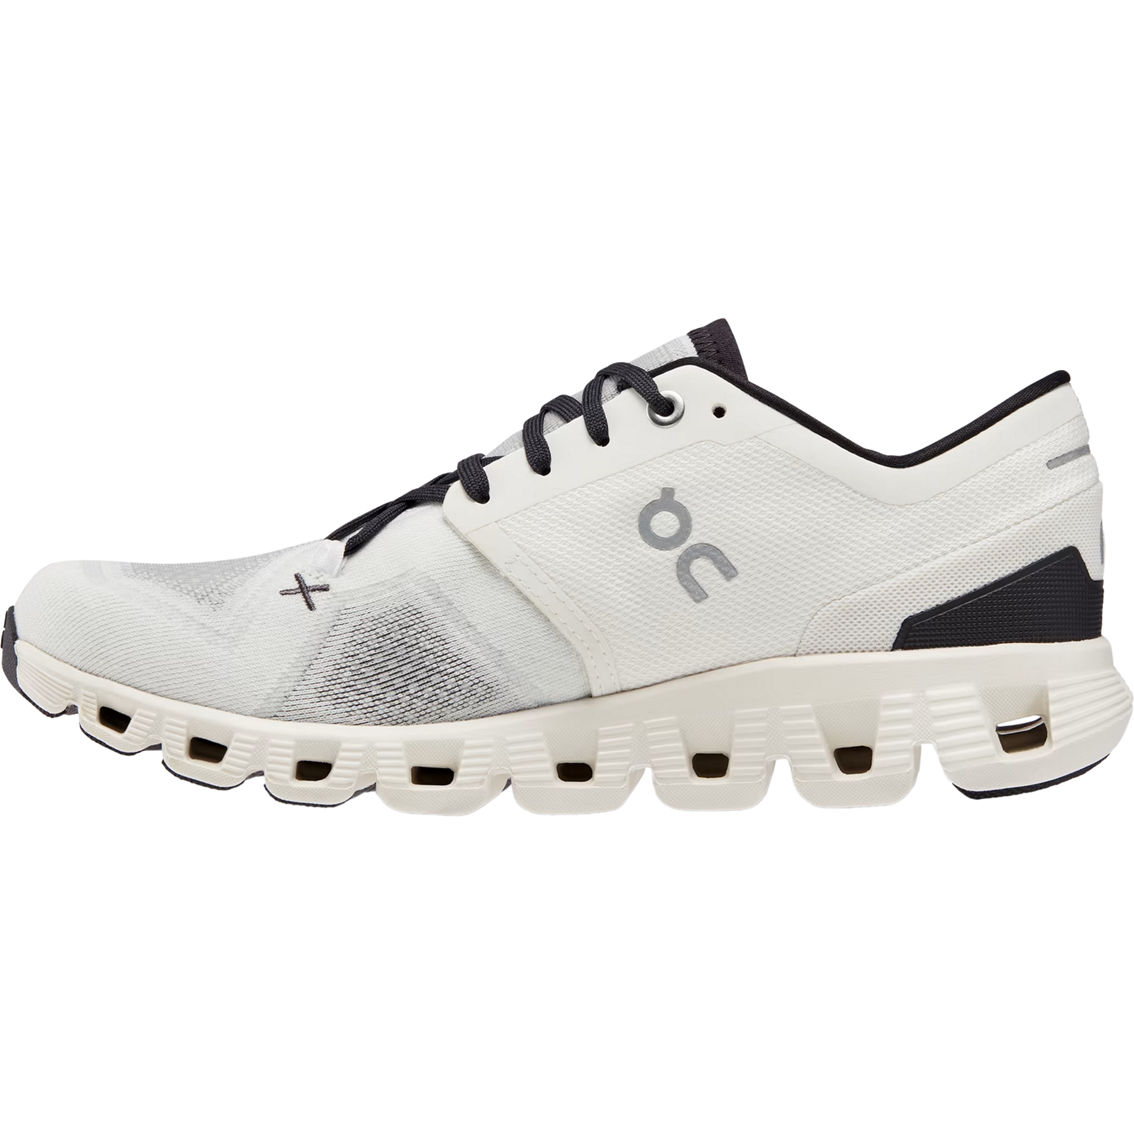 On Women's Cloud X 3 Running Shoes - Image 3 of 6